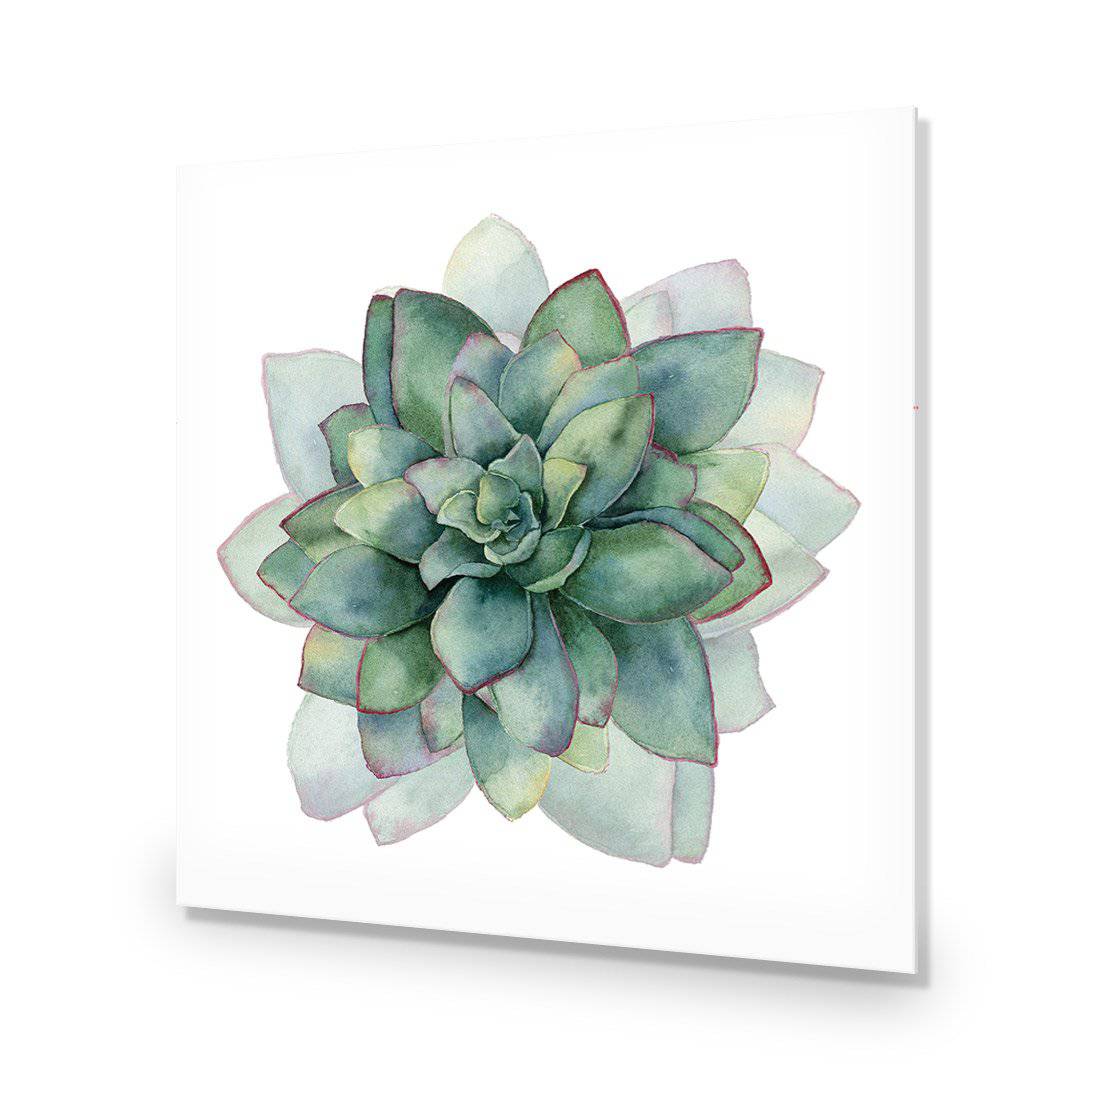 Succulent Spiral, Square-Acrylic-Wall Art Design-Without Border-Acrylic - No Frame-37x37cm-Wall Art Designs